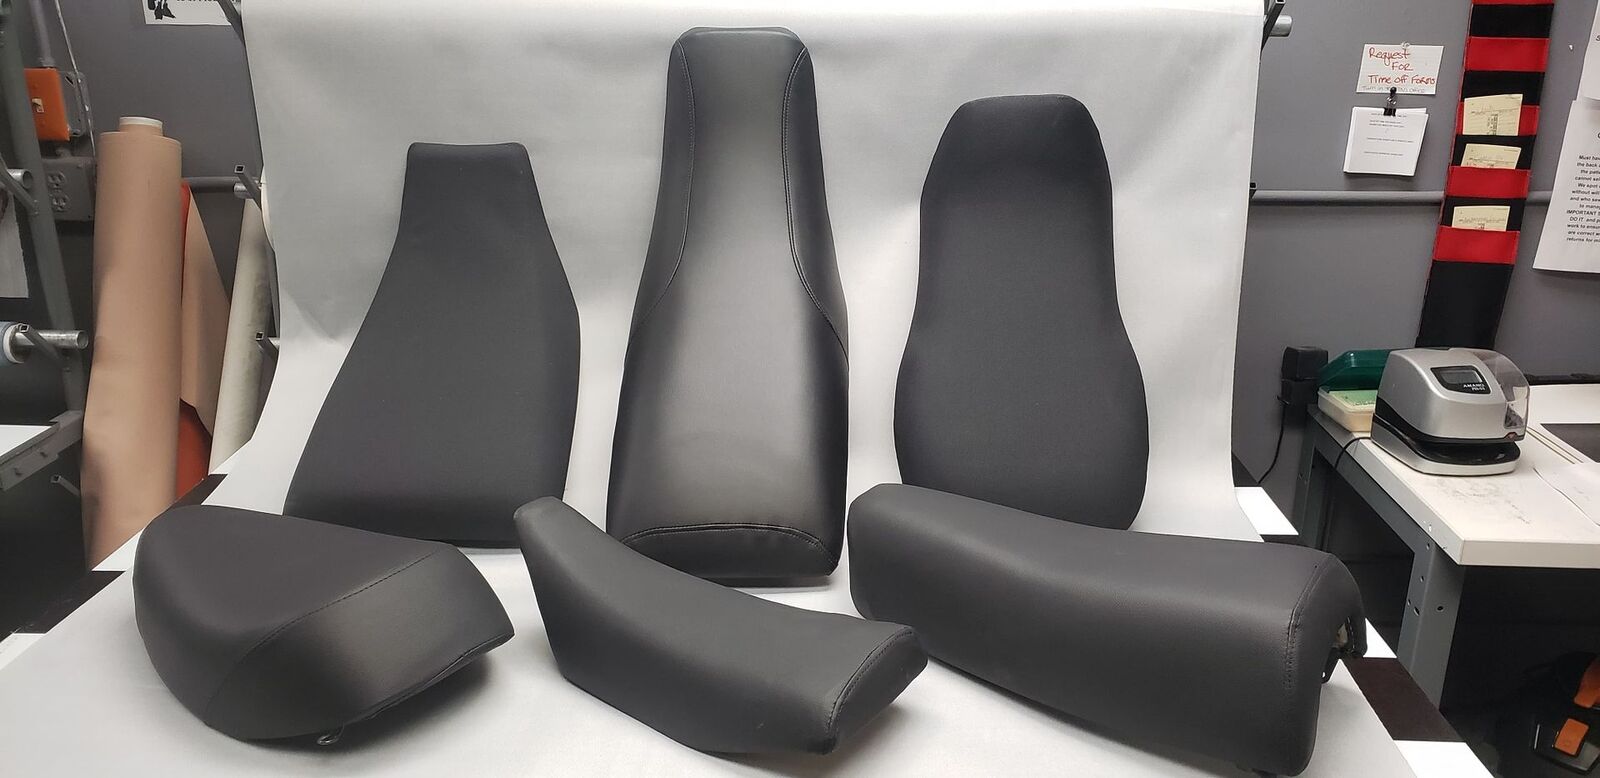 Suzuki TC 125 Seat Cover For 1972 To 1977 Models